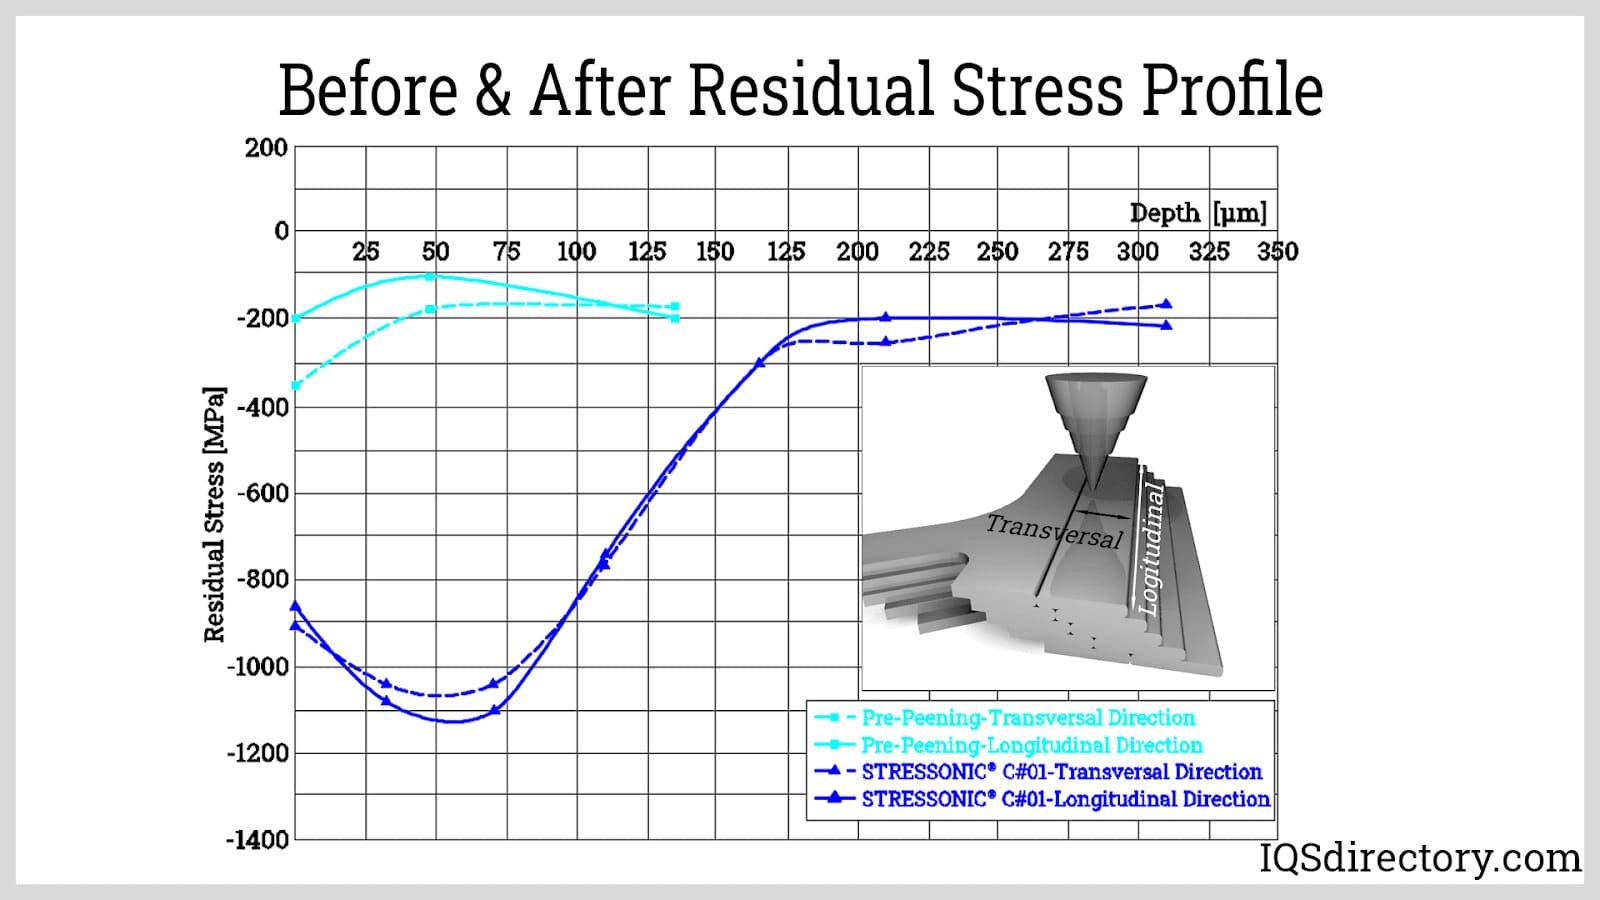 Before & After Residual Stress Profile